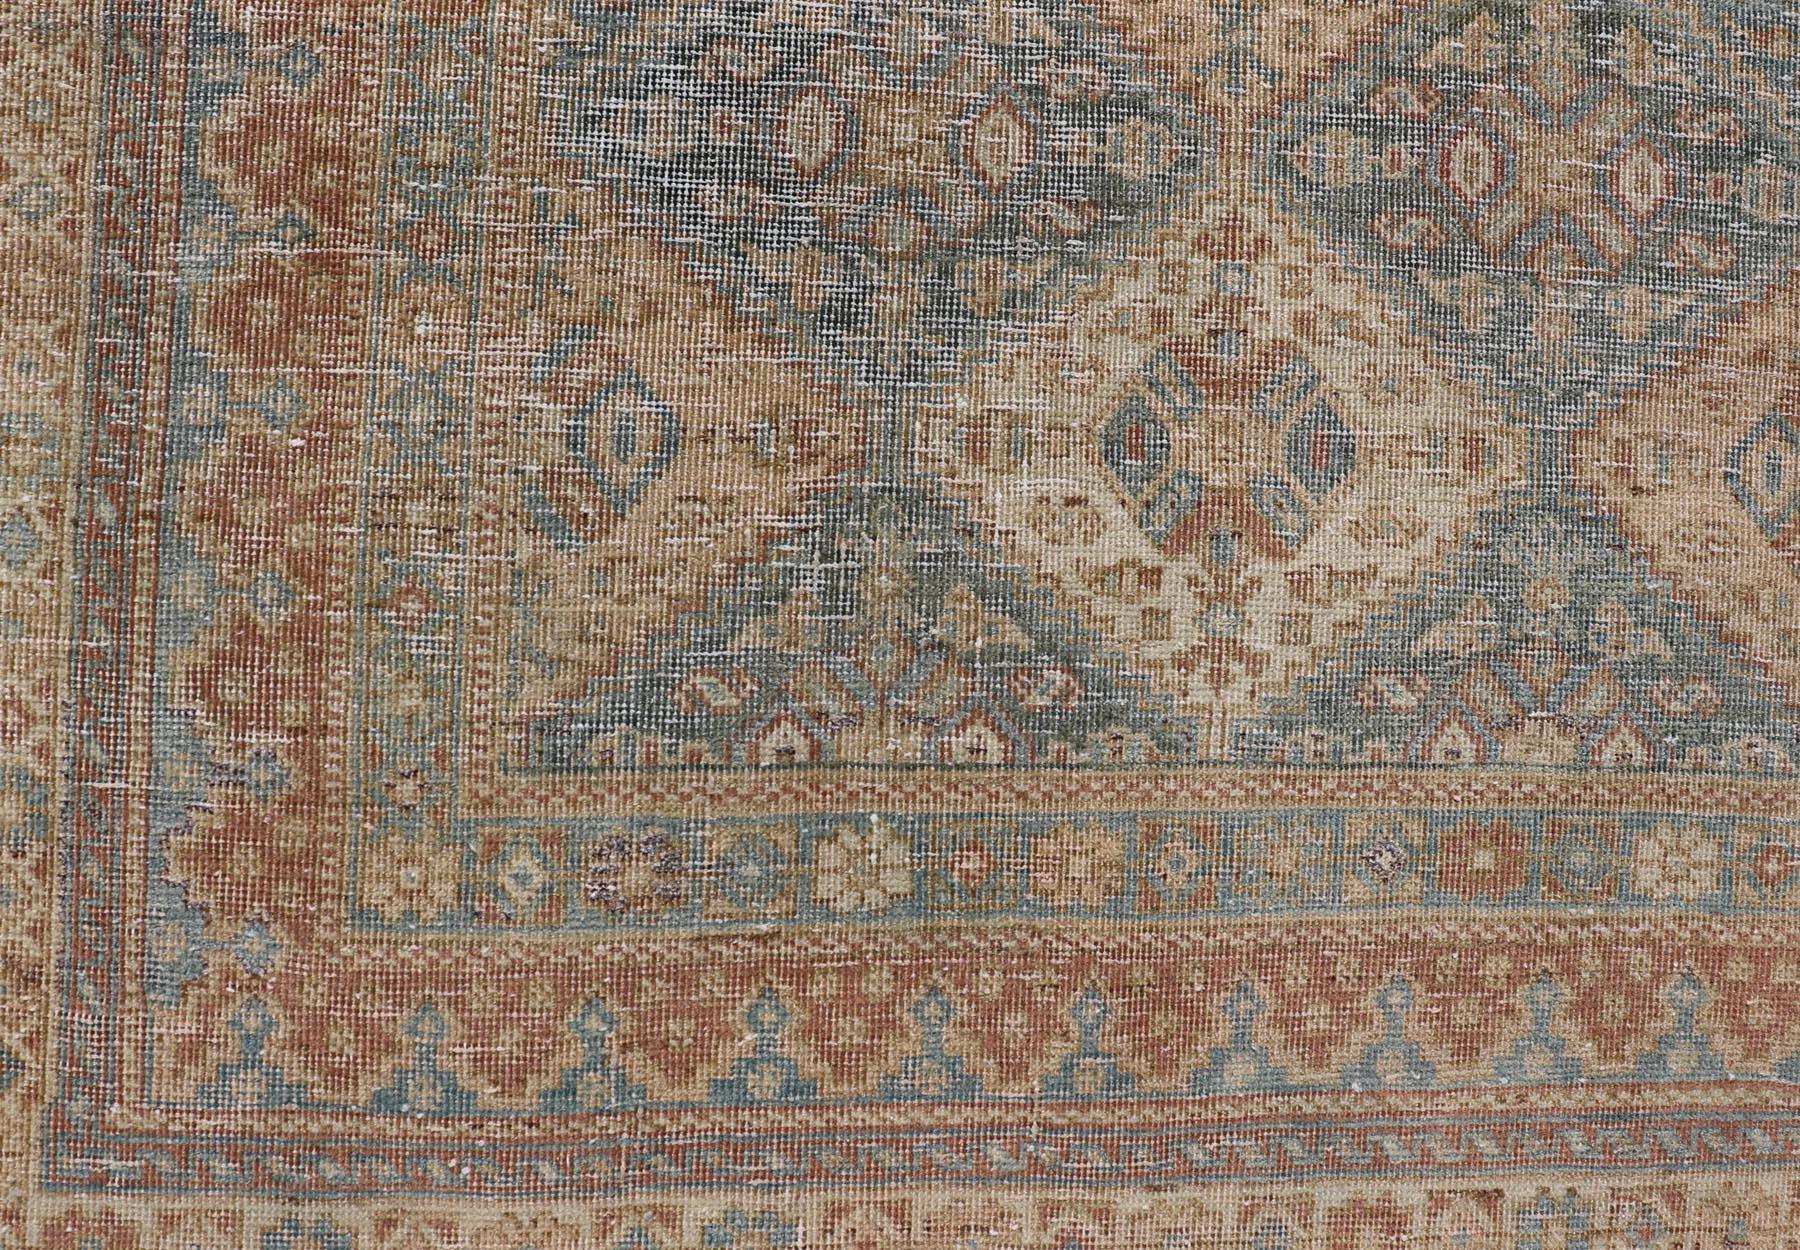 Square shape Antique Persian Tabriz Rug in Wool with repeating Diamond Design in Blue, Apricot, butter & Gray. Keivan Woven Arts / rug VAS-189102, country of origin / type: Iran / Tabriz, circa 1920s.

Measures: 5'4 x 6'7 

This Tabriz rug